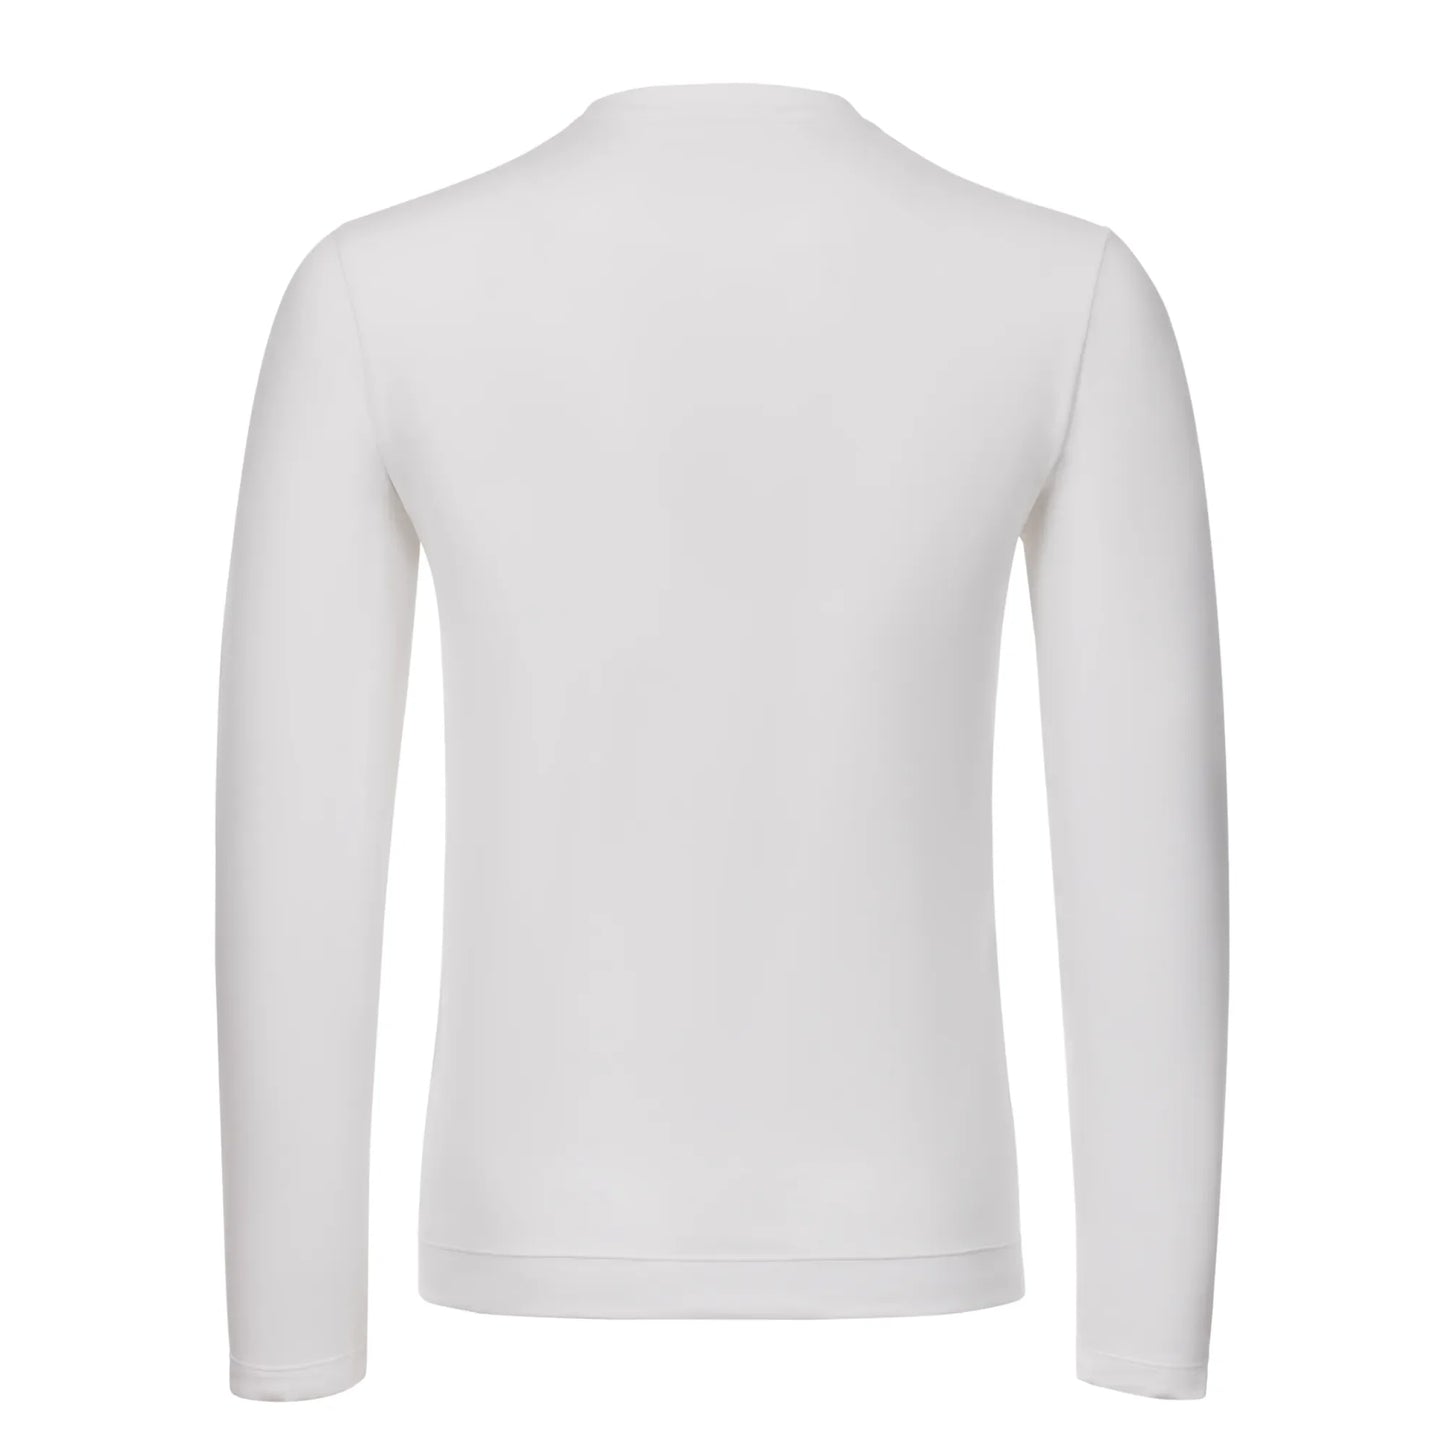 Crewneck Cotton Long Sleeve in White